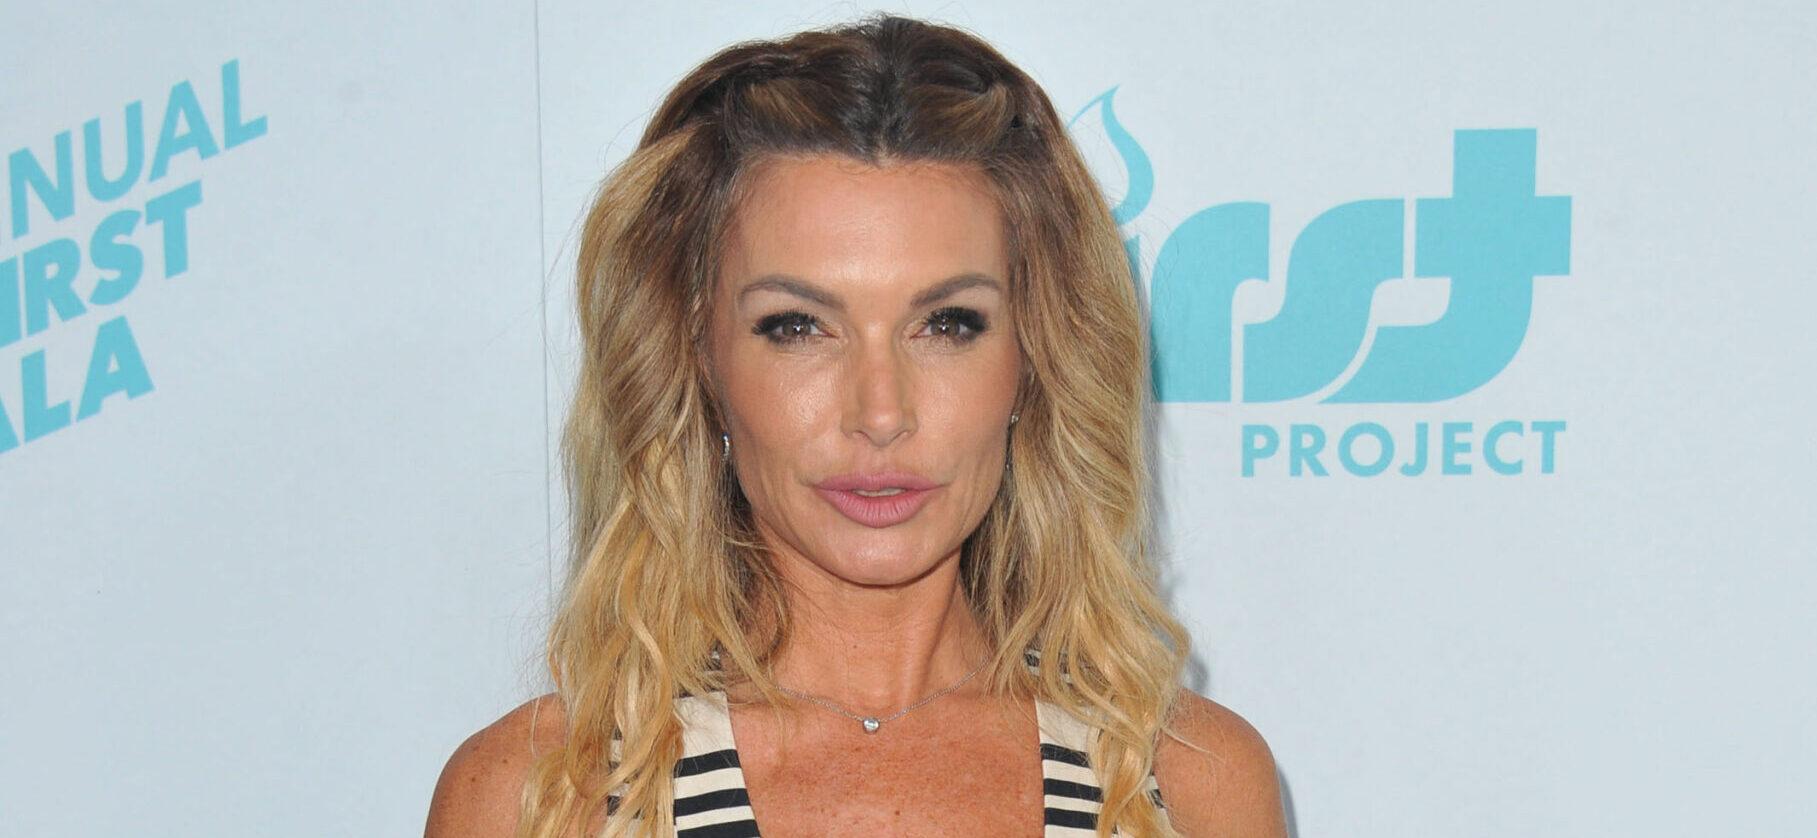 RHOBH Star Eden Sasson Sued Over Alleged 'Vicious' Dog Attack That Caused 'Permanent Disability'